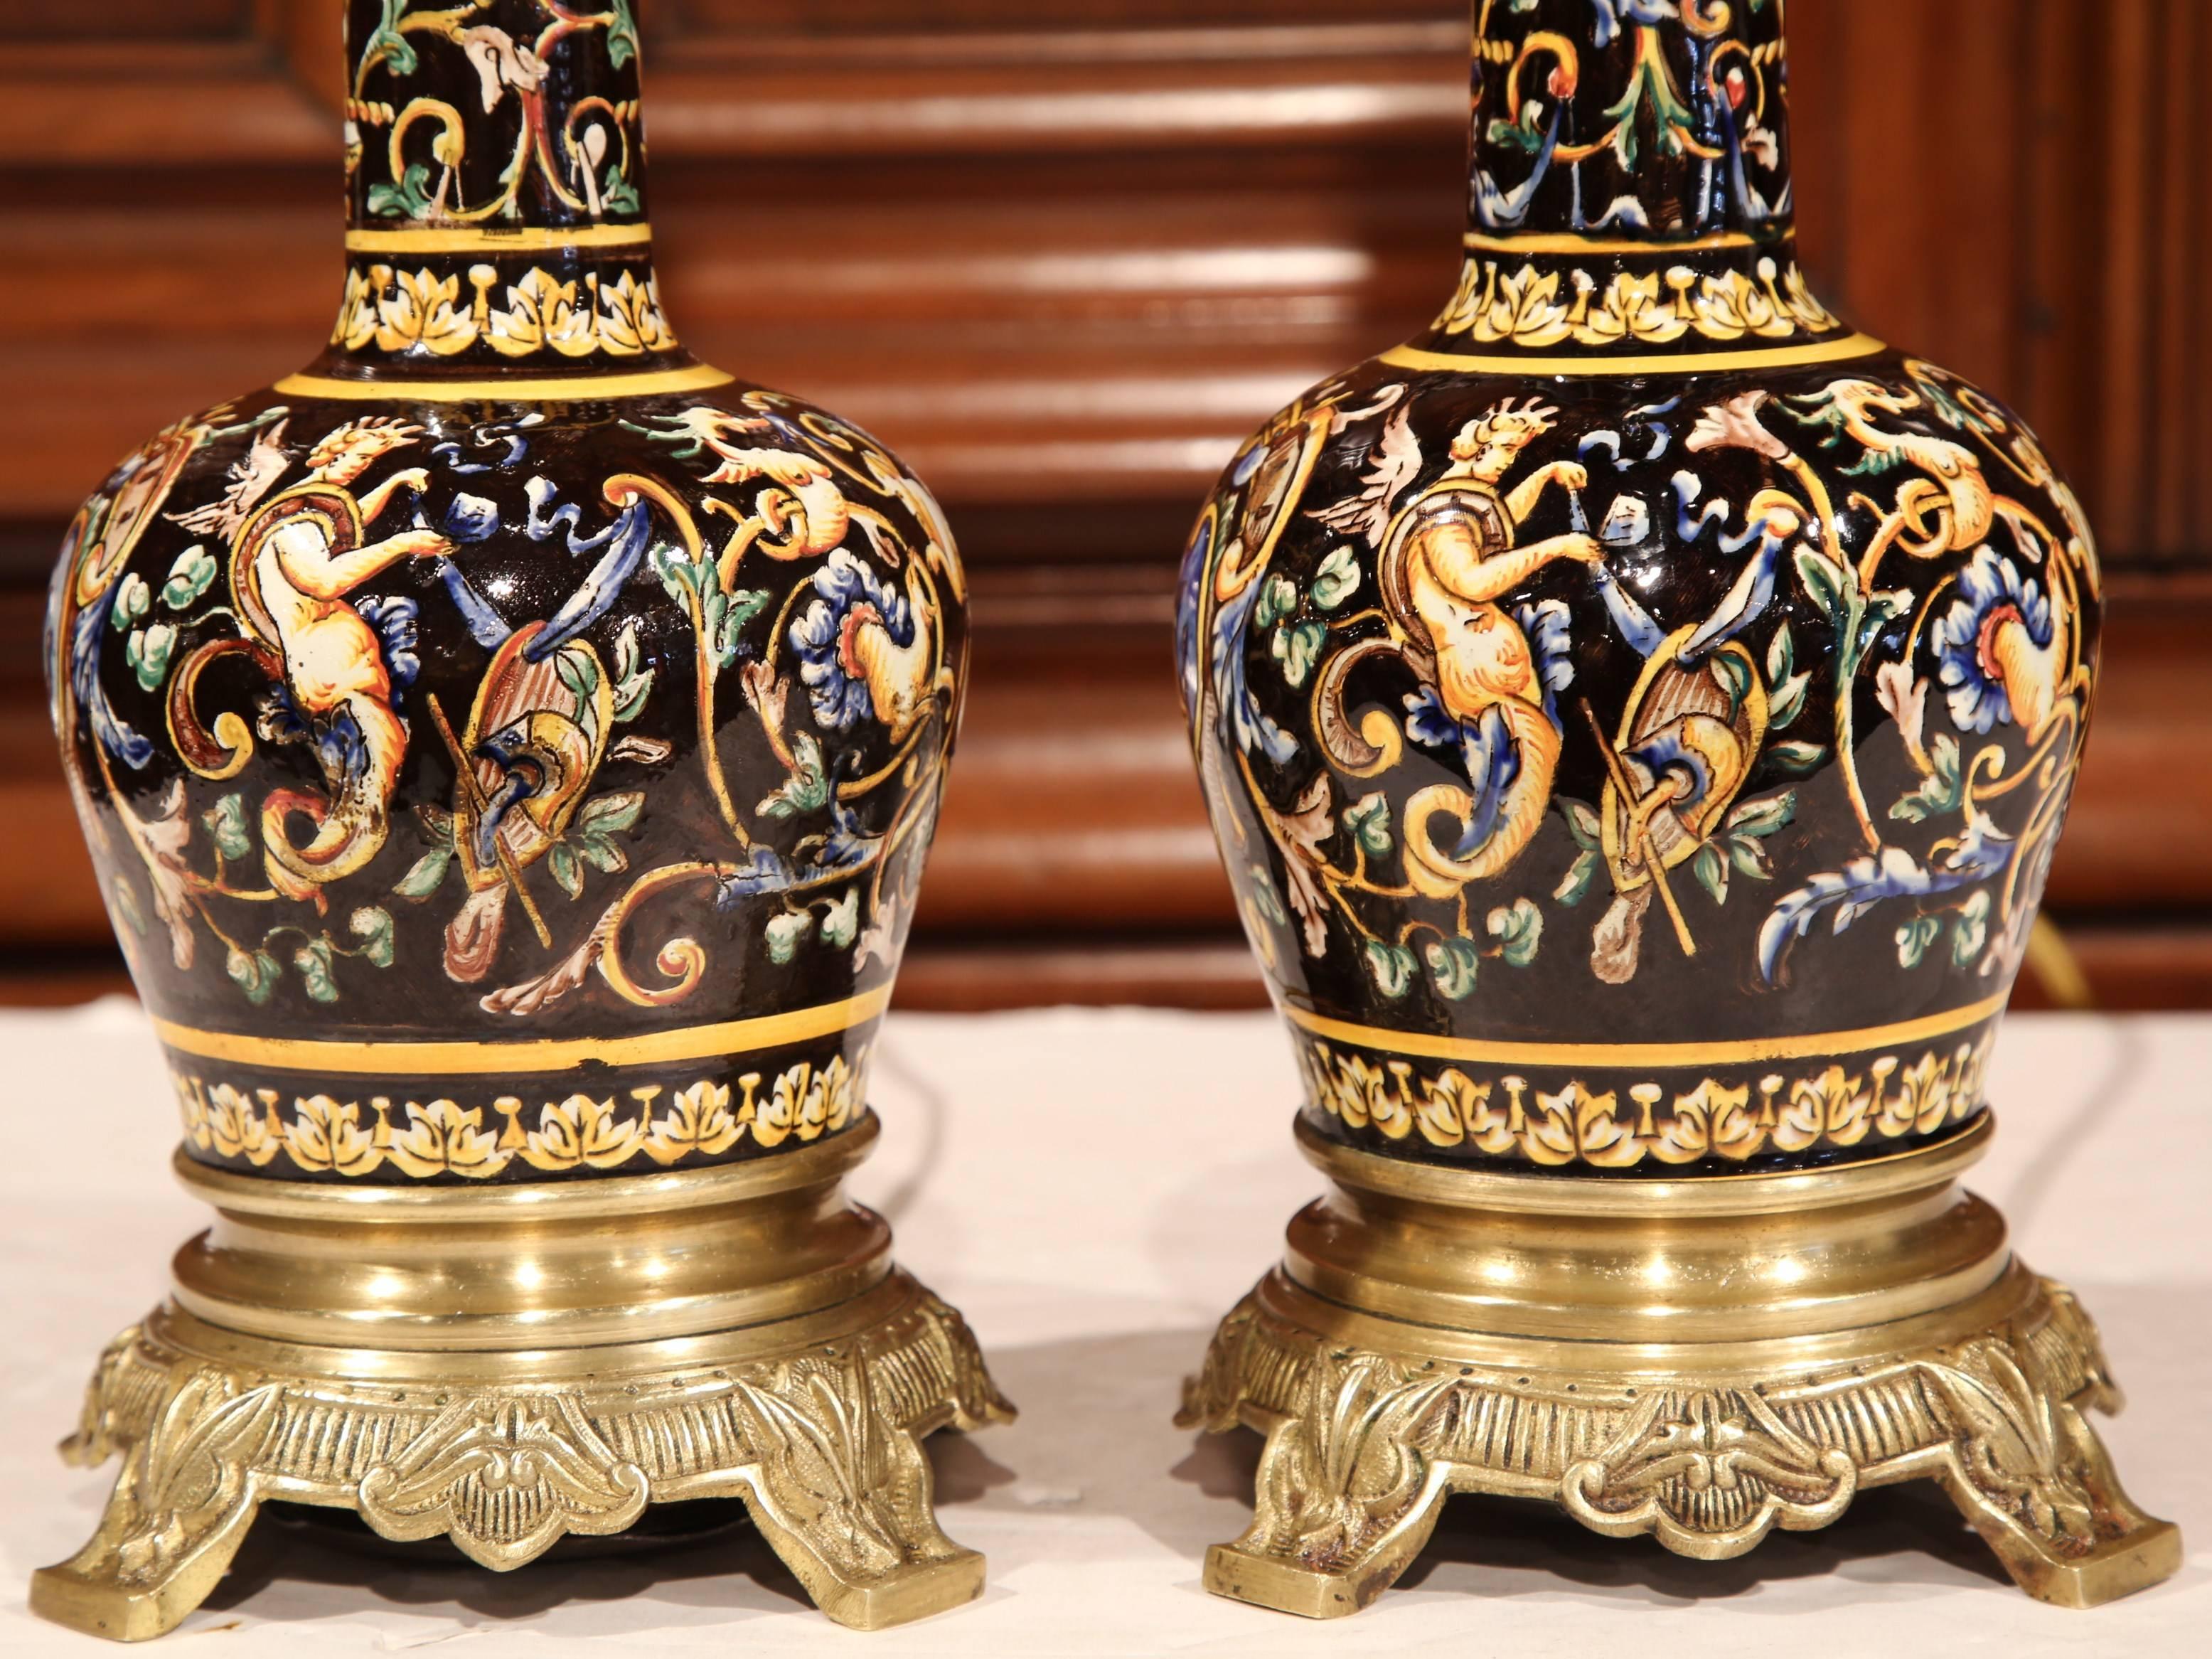 Pair of 19th Century French Hand-Painted Porcelain Oil Lamps with Bronze Mounts 1